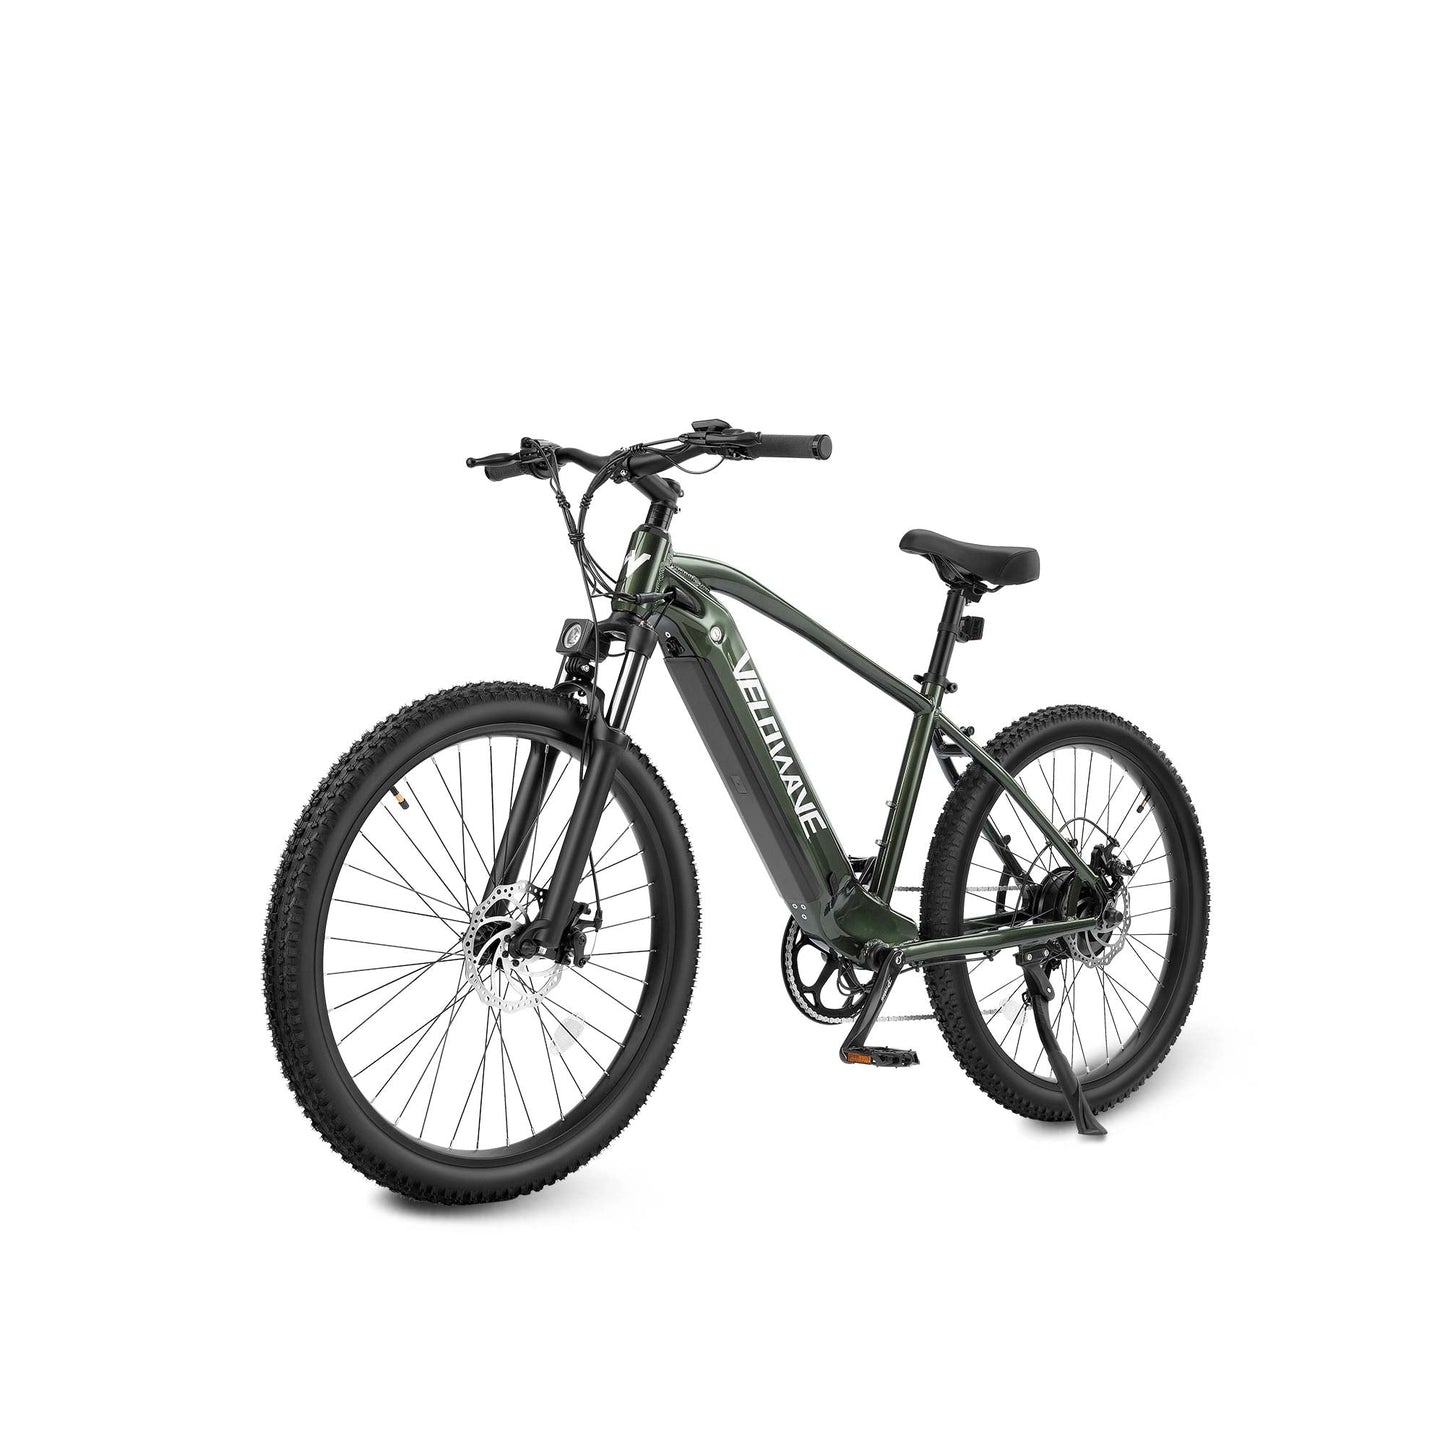 Velowave Ghost 500 Electric Mountain Bike With Suspension Fork - 500W Motor 27.5" Tires